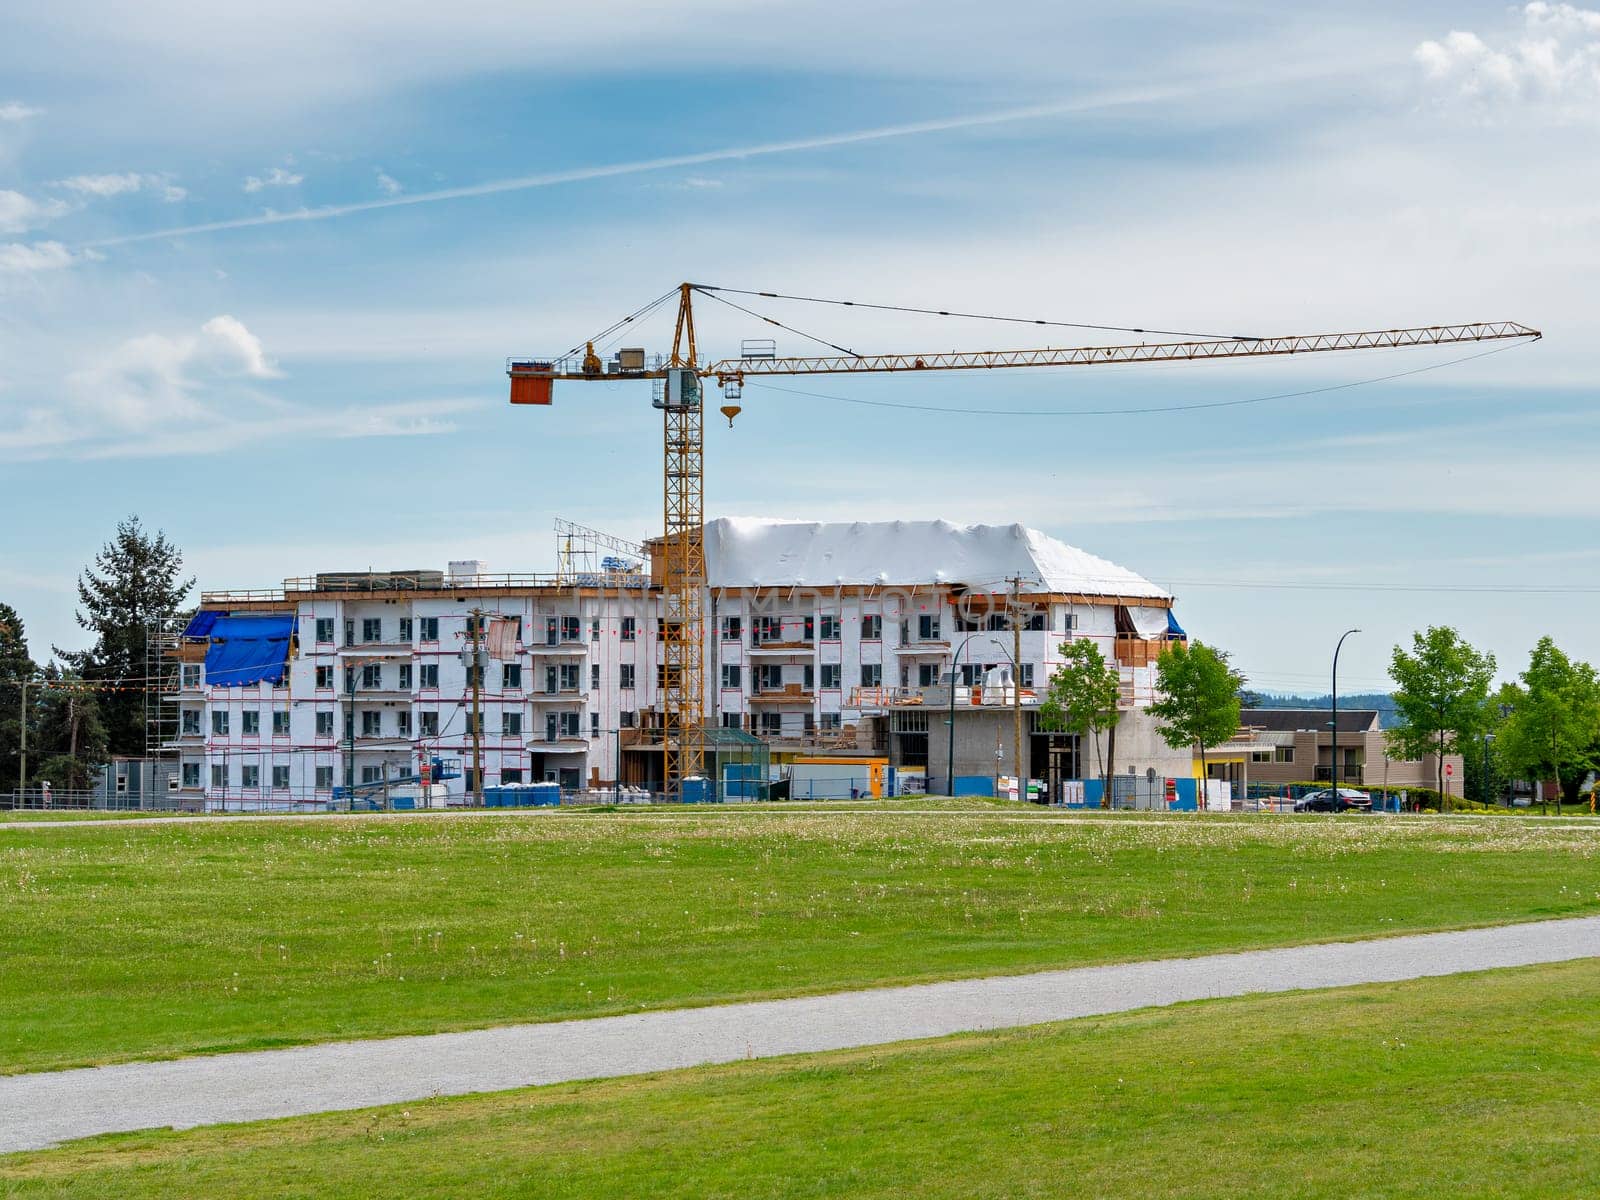 New low-rise residential building under construction with recreational green lawn in front.